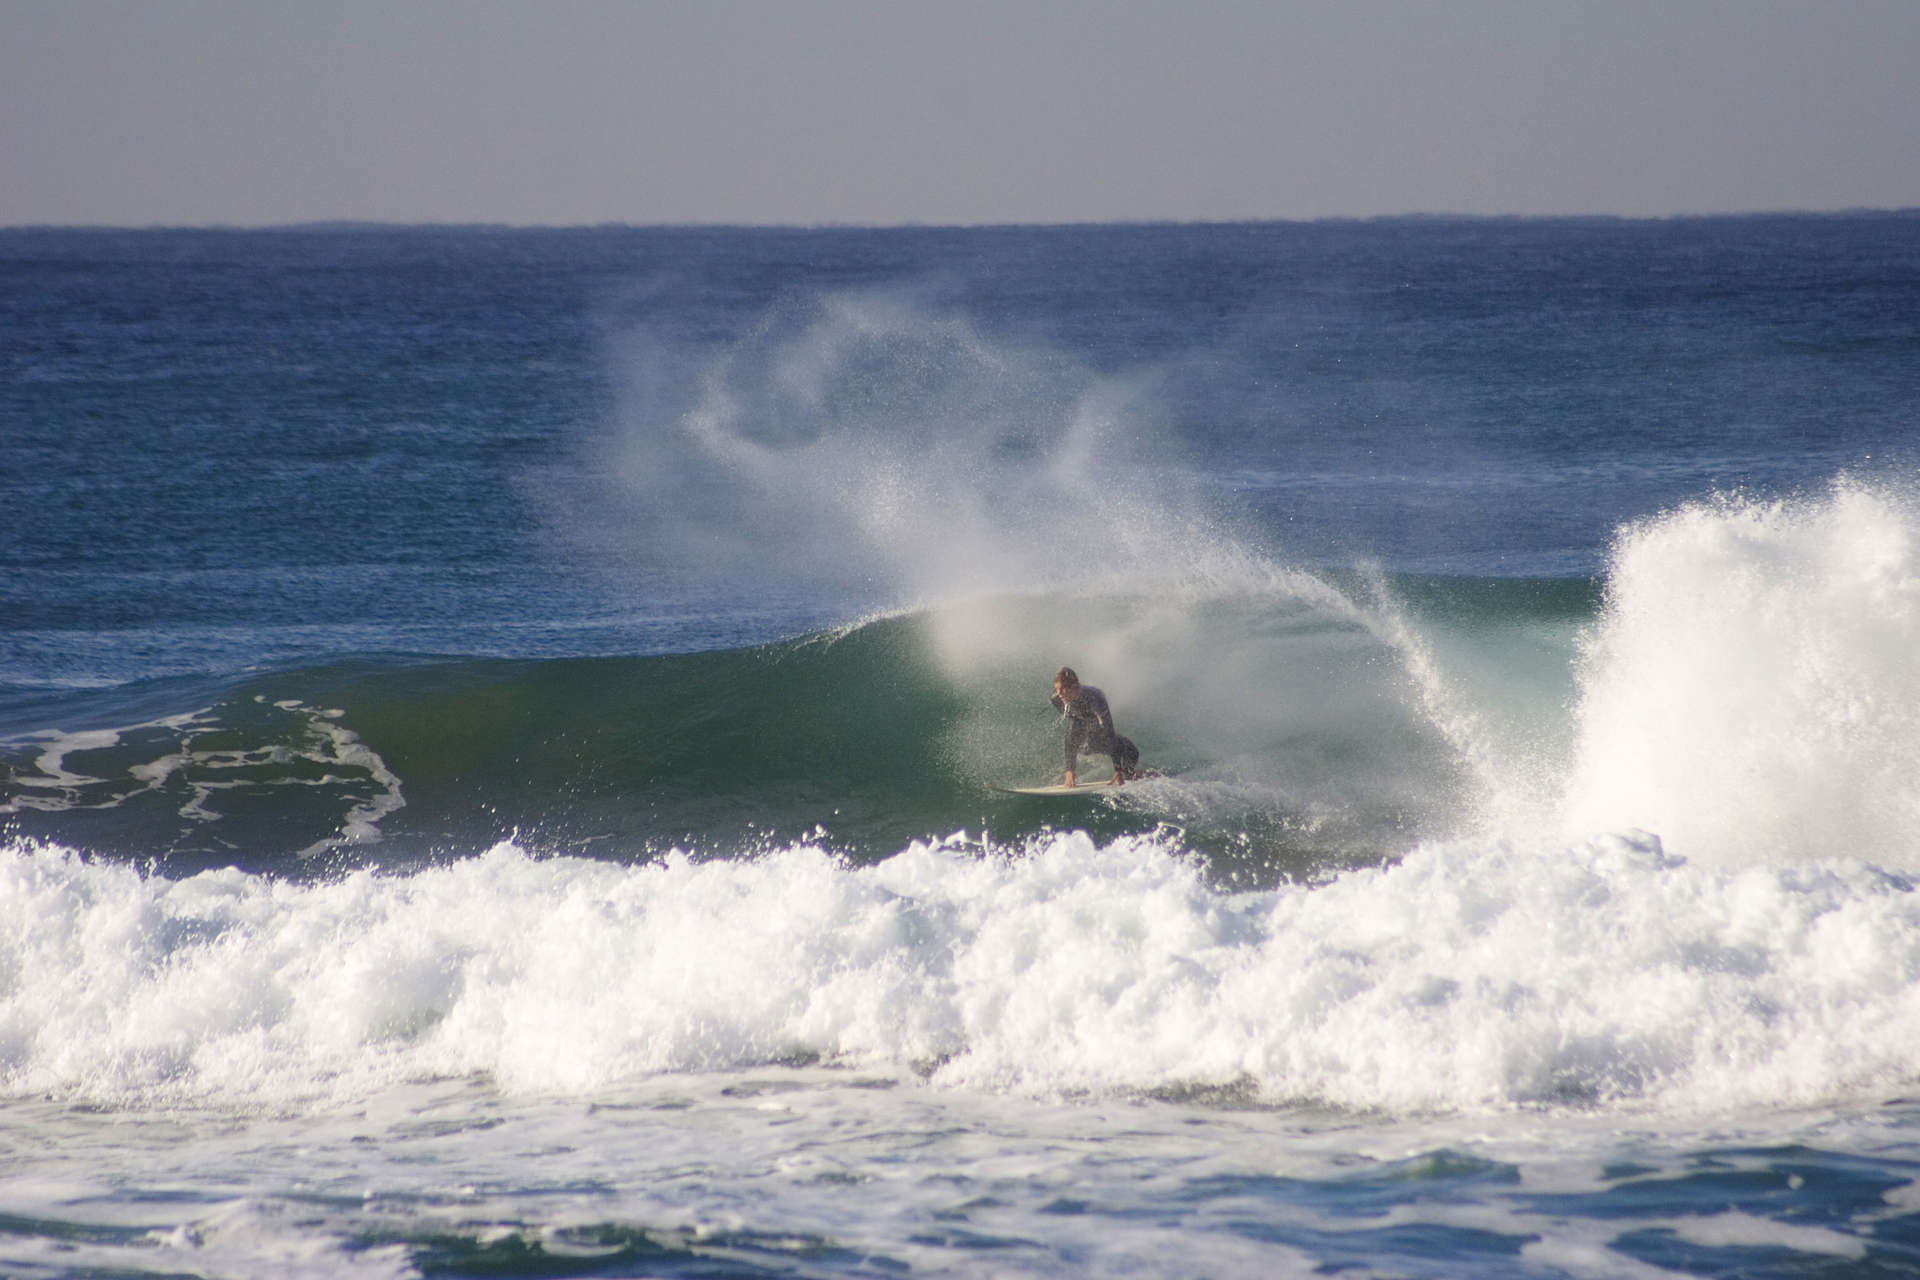 Ballito Pro surfing event is held in June and July, on Willard Beach just north of Durban